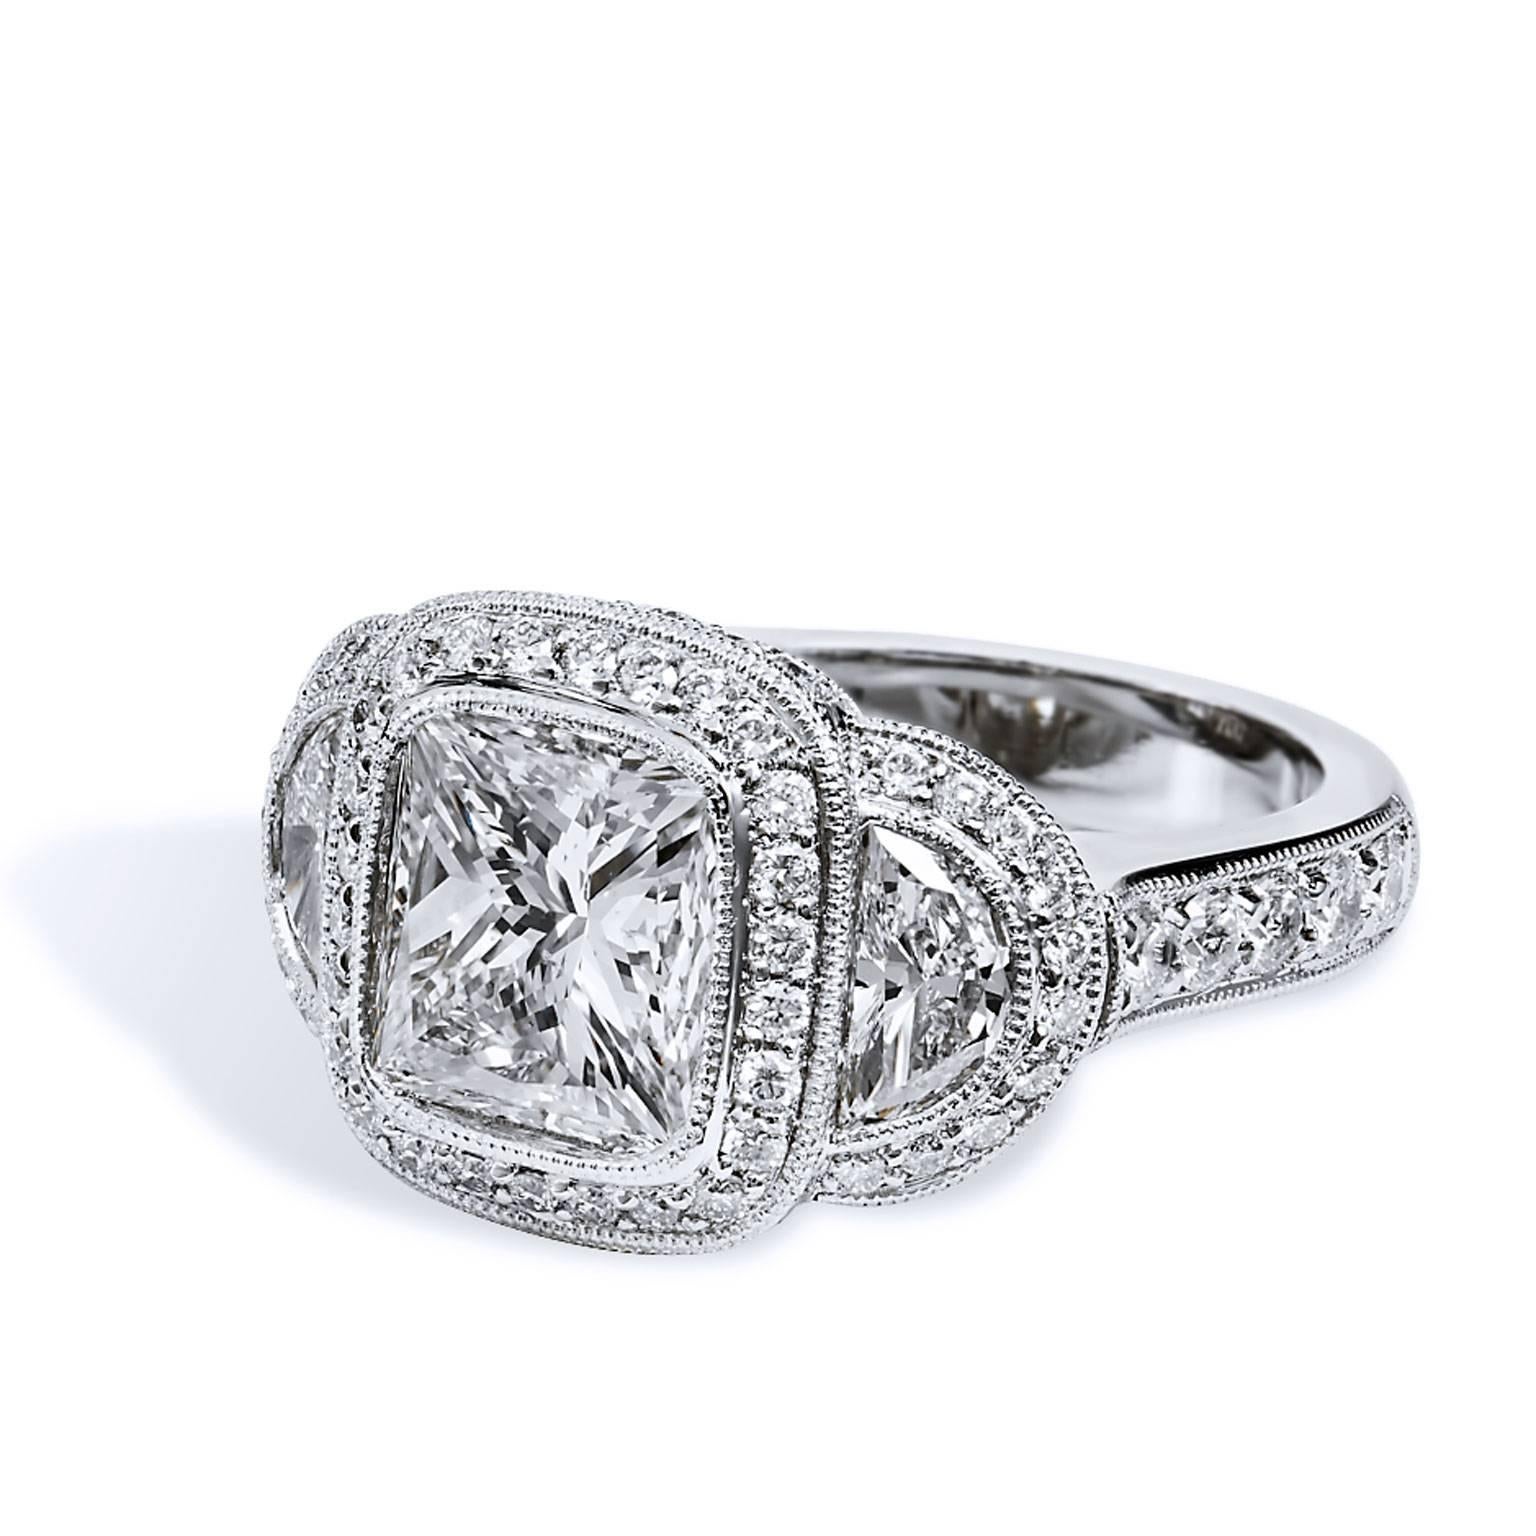 GIA Certified 3.47 Carat Diamond Platinum Engagement Ring Size 

This is an absolutely stunning, handcrafted ring by H&H Jewels. This ring features a luminous, awe-inspiring 3.47 carat modified square brilliant cut bezel set diamond, color I and